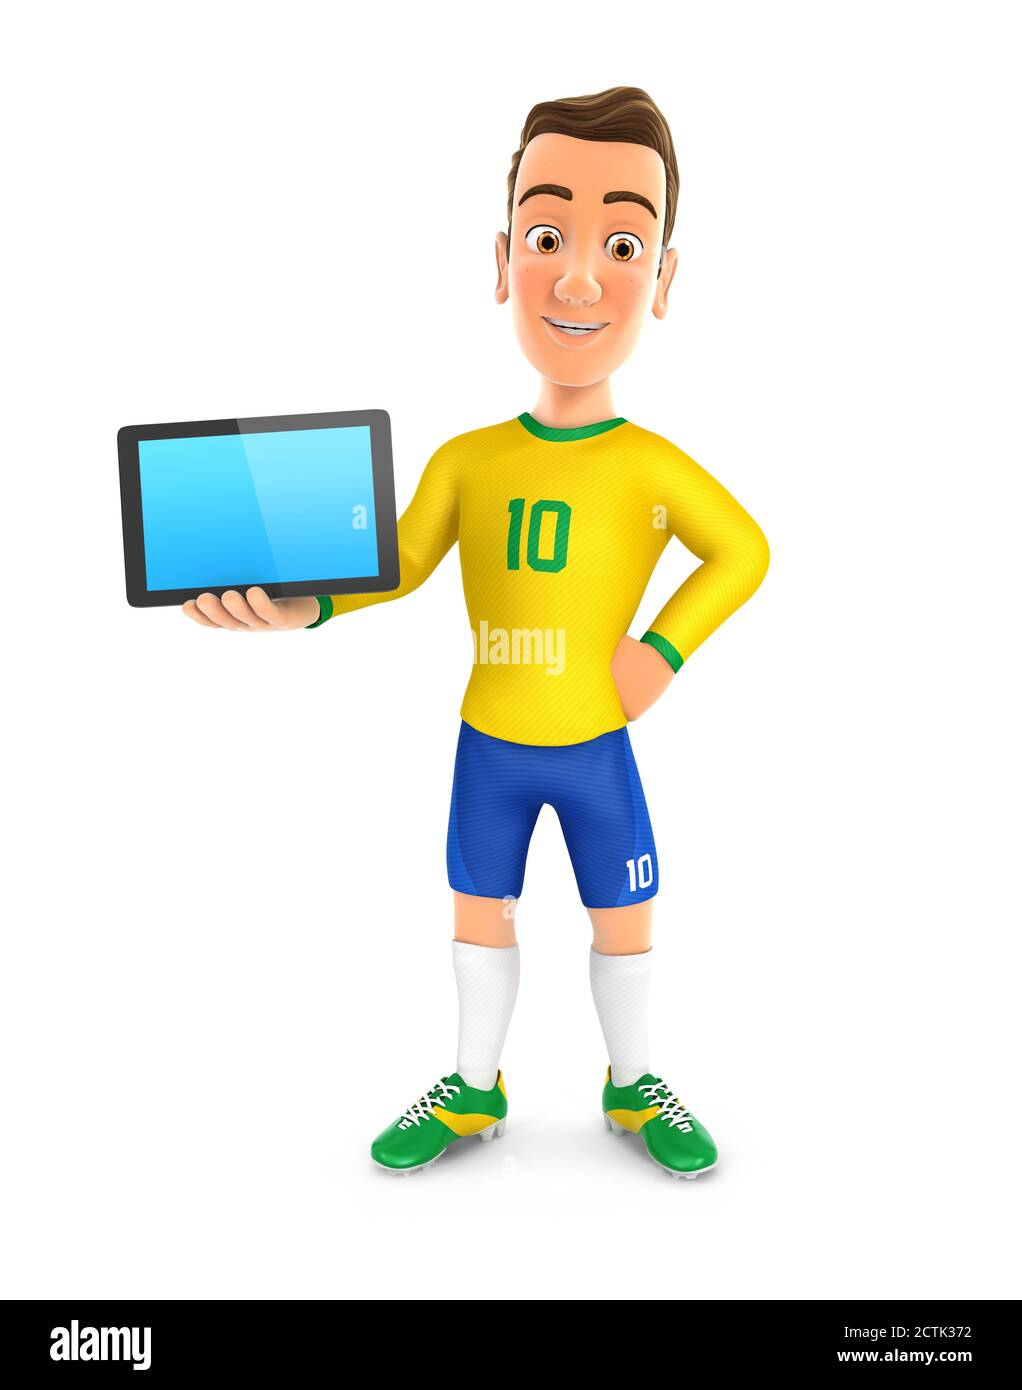 3d soccer player yellow jersey standing with a tablet, illustration with isolated white background Stock Photo